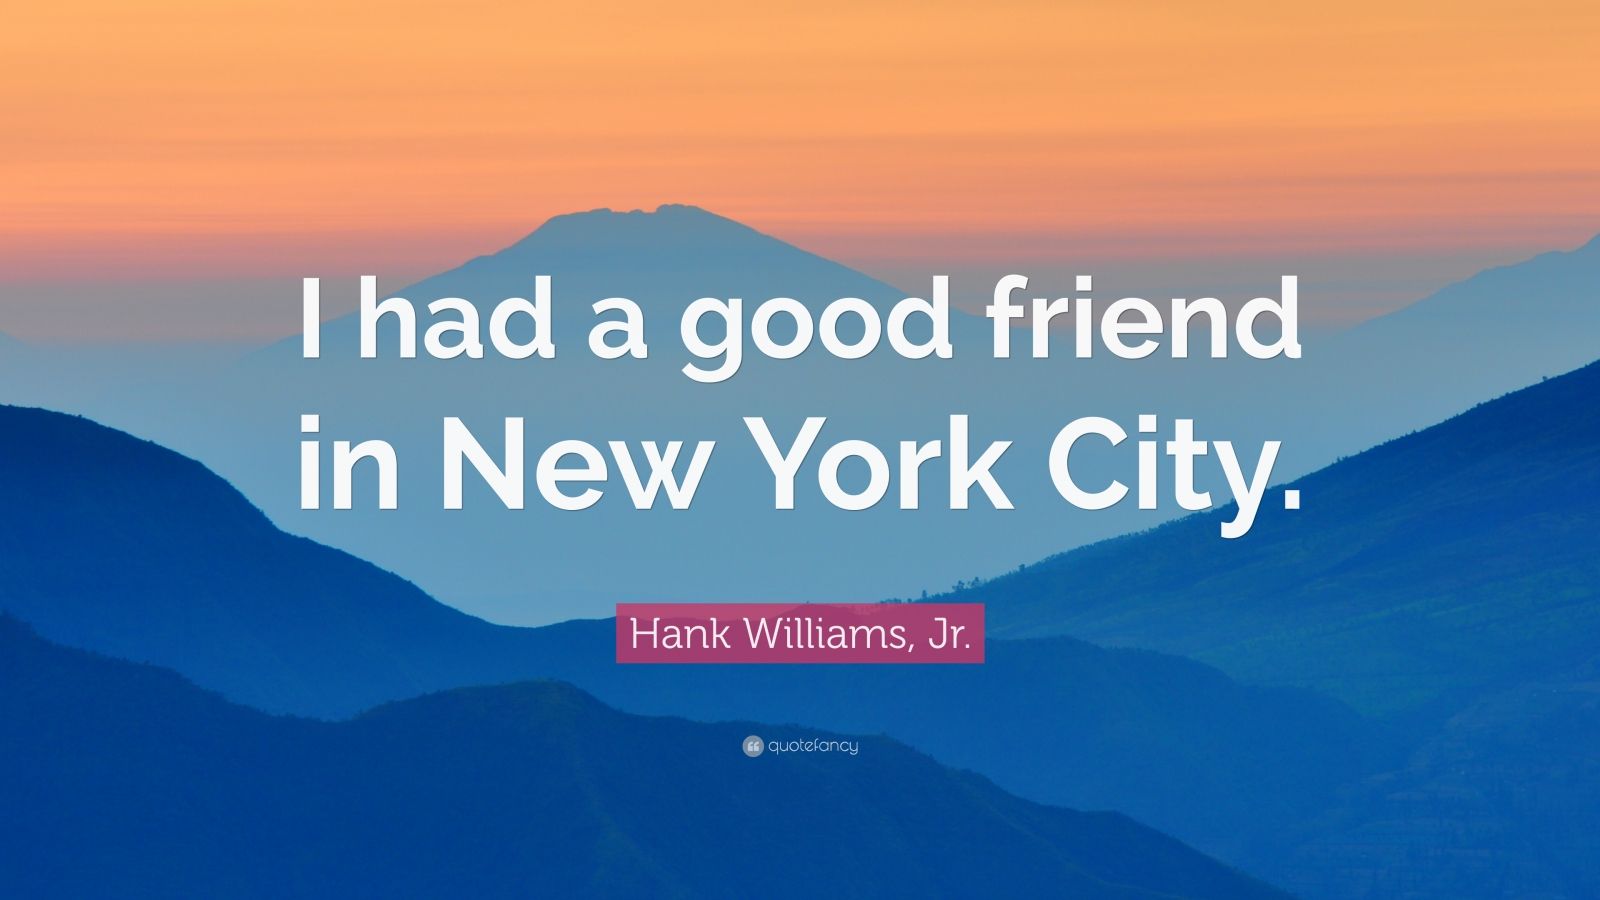 Hank Williams, Jr. Quote: “I had a good friend in New York City.” (7